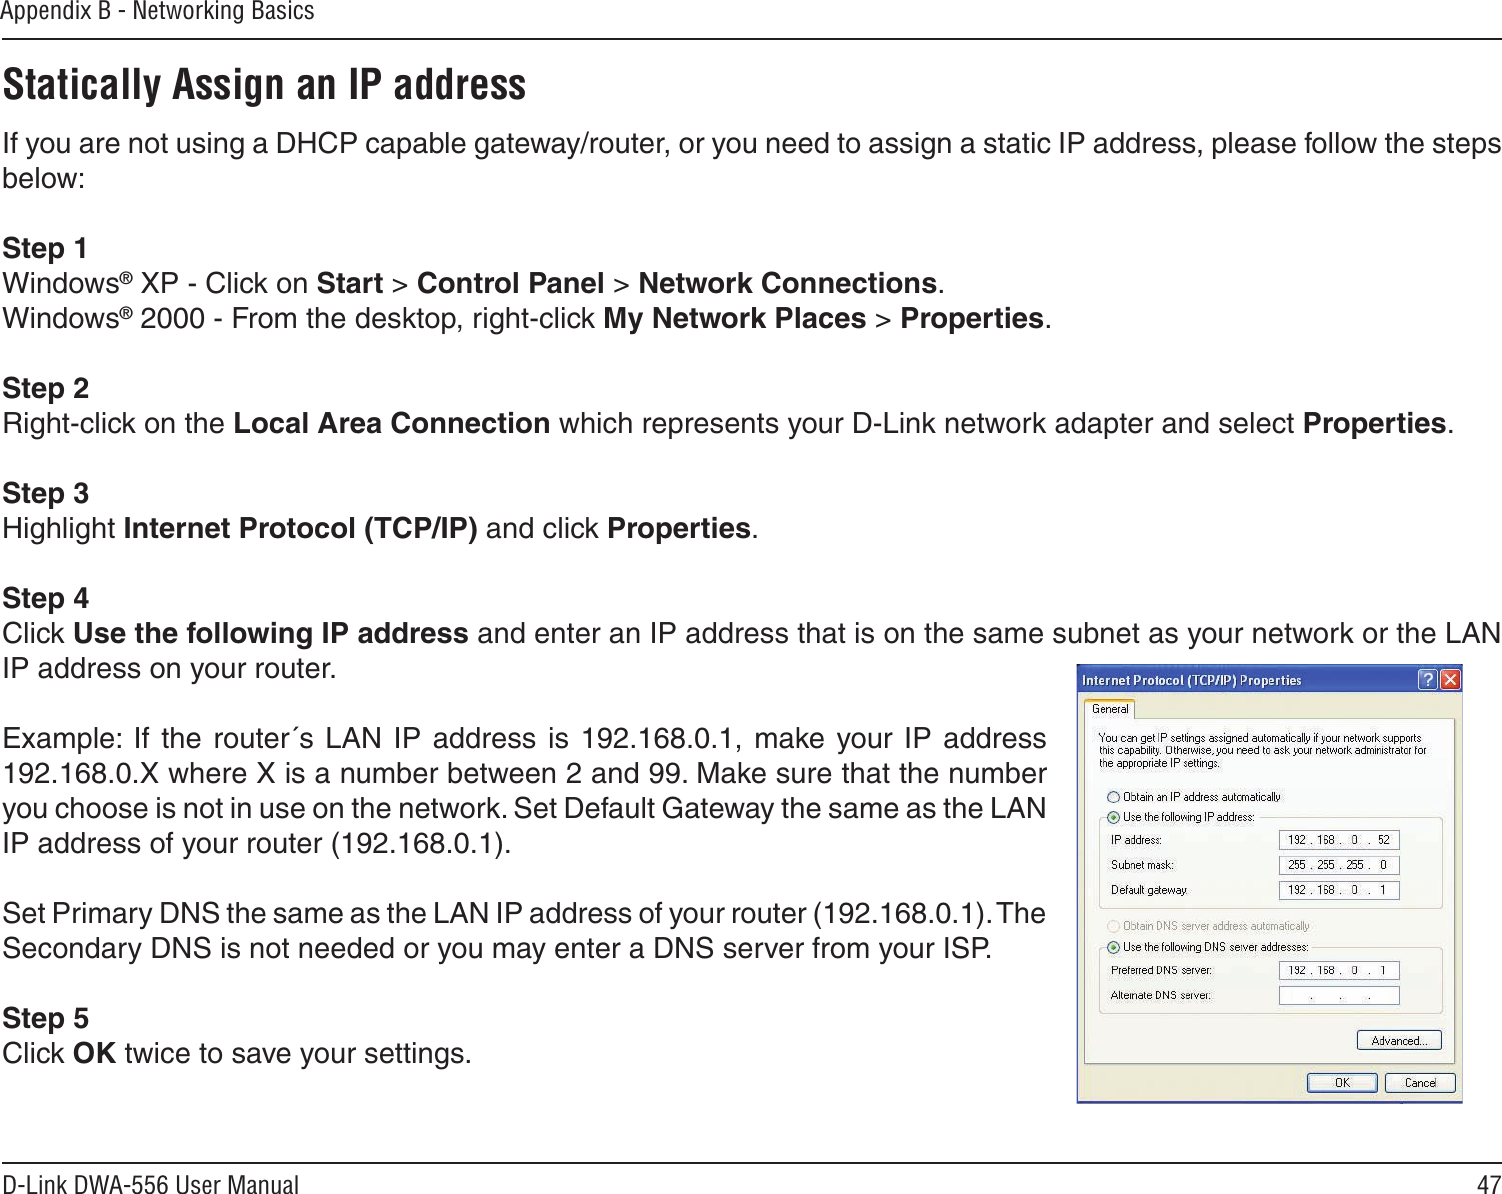 47D-Link DWA-556 User ManualAppendix B - Networking BasicsStatically Assign an IP addressIf you are not using a DHCP capable gateway/router, or you need to assign a static IP address, please follow the steps below:Step 1Windows® XP - Click on Start &gt; Control Panel &gt; Network Connections.Windows® 2000 - From the desktop, right-click My Network Places &gt; Properties.Step 2Right-click on the Local Area Connection which represents your D-Link network adapter and select Properties.Step 3Highlight Internet Protocol (TCP/IP) and click Properties.Step 4Click Use the following IP address and enter an IP address that is on the same subnet as your network or the LAN IP address on your router. Example:  If  the  router´s LAN IP  address  is  192.168.0.1,  make your IP address 192.168.0.X where X is a number between 2 and 99. Make sure that the number you choose is not in use on the network. Set Default Gateway the same as the LAN IP address of your router (192.168.0.1). Set Primary DNS the same as the LAN IP address of your router (192.168.0.1). The Secondary DNS is not needed or you may enter a DNS server from your ISP.Step 5Click OK twice to save your settings.